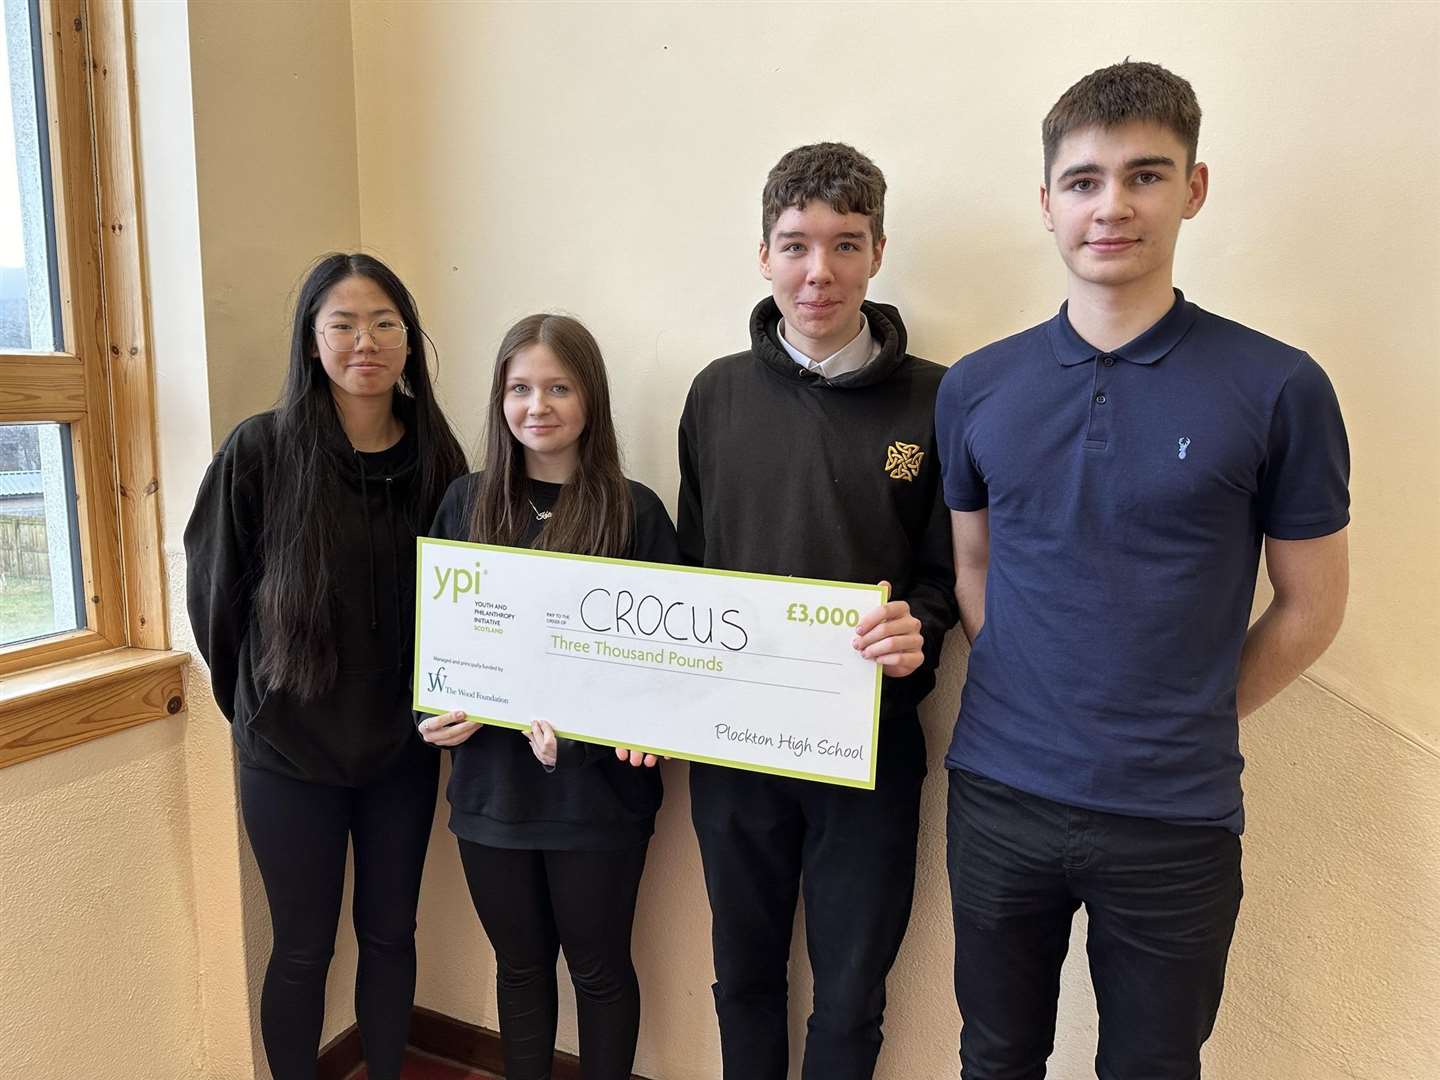 Plockton High School pupils, Kelly Lin, Katie Greville, Charlie MacVicar and Hamish MacLean, who secured £3000 for CROCUS through the YPI initiative.